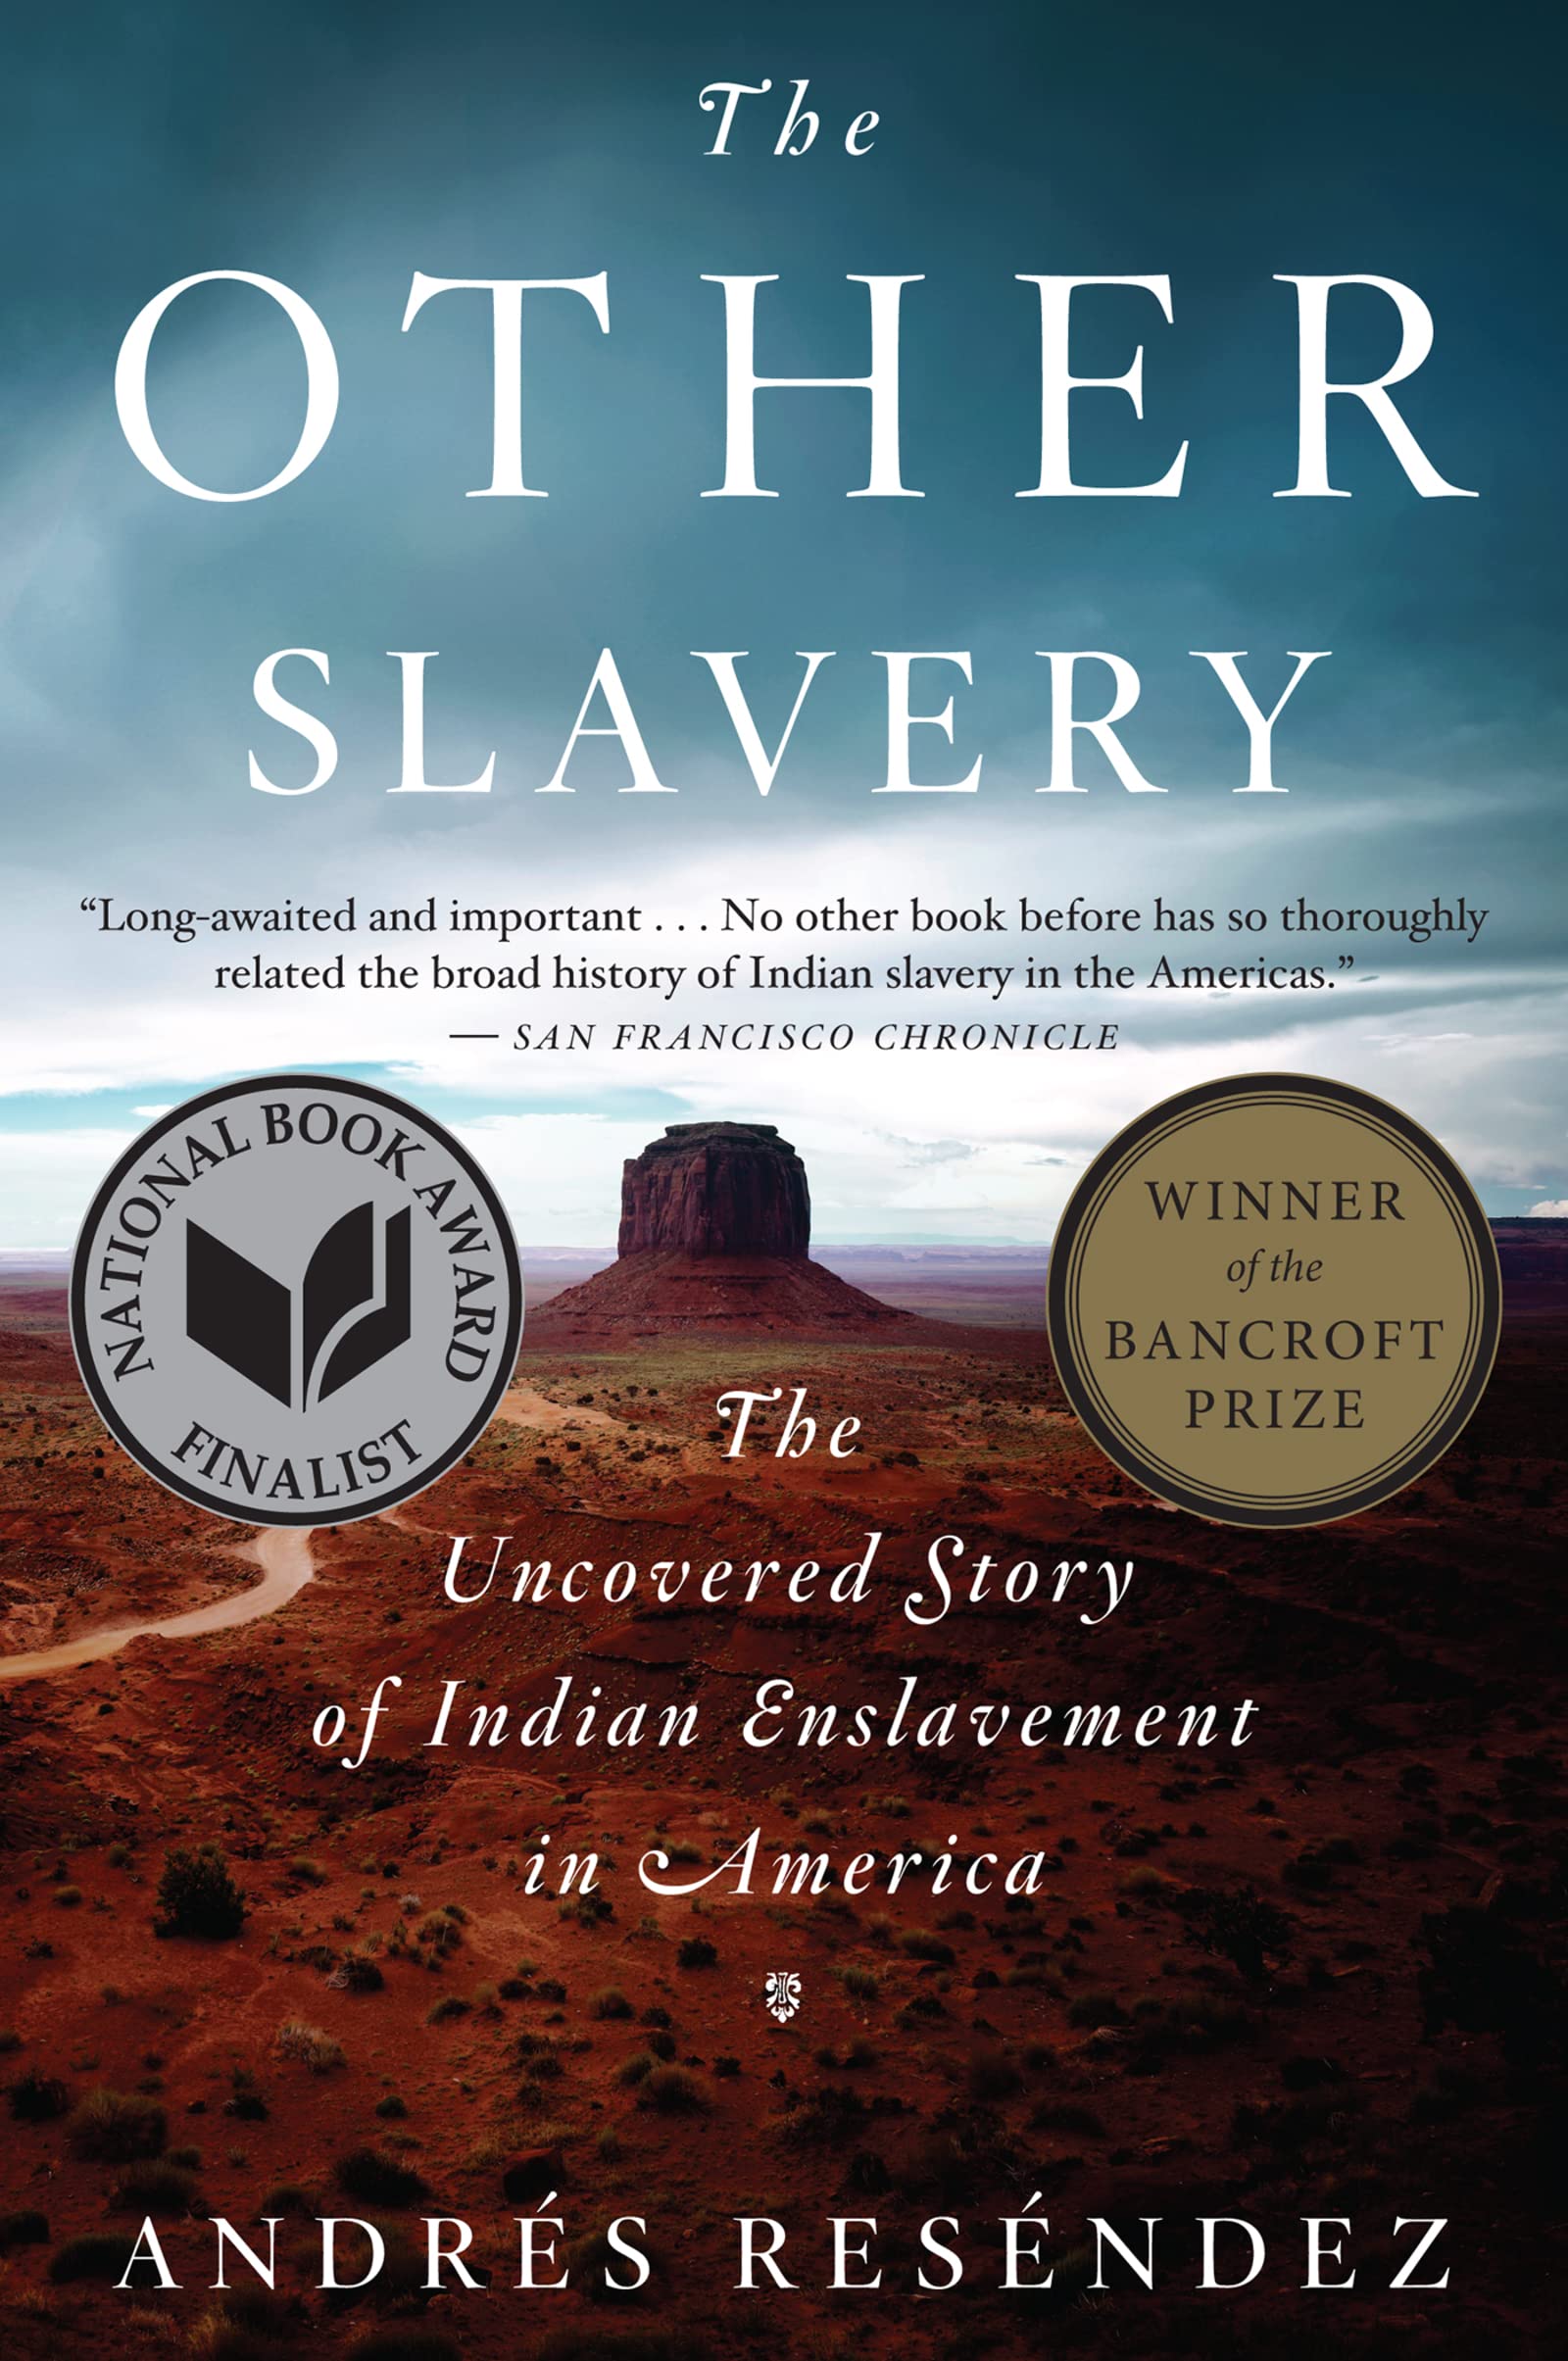 book cover the other slavery by Andrés Reséndez 